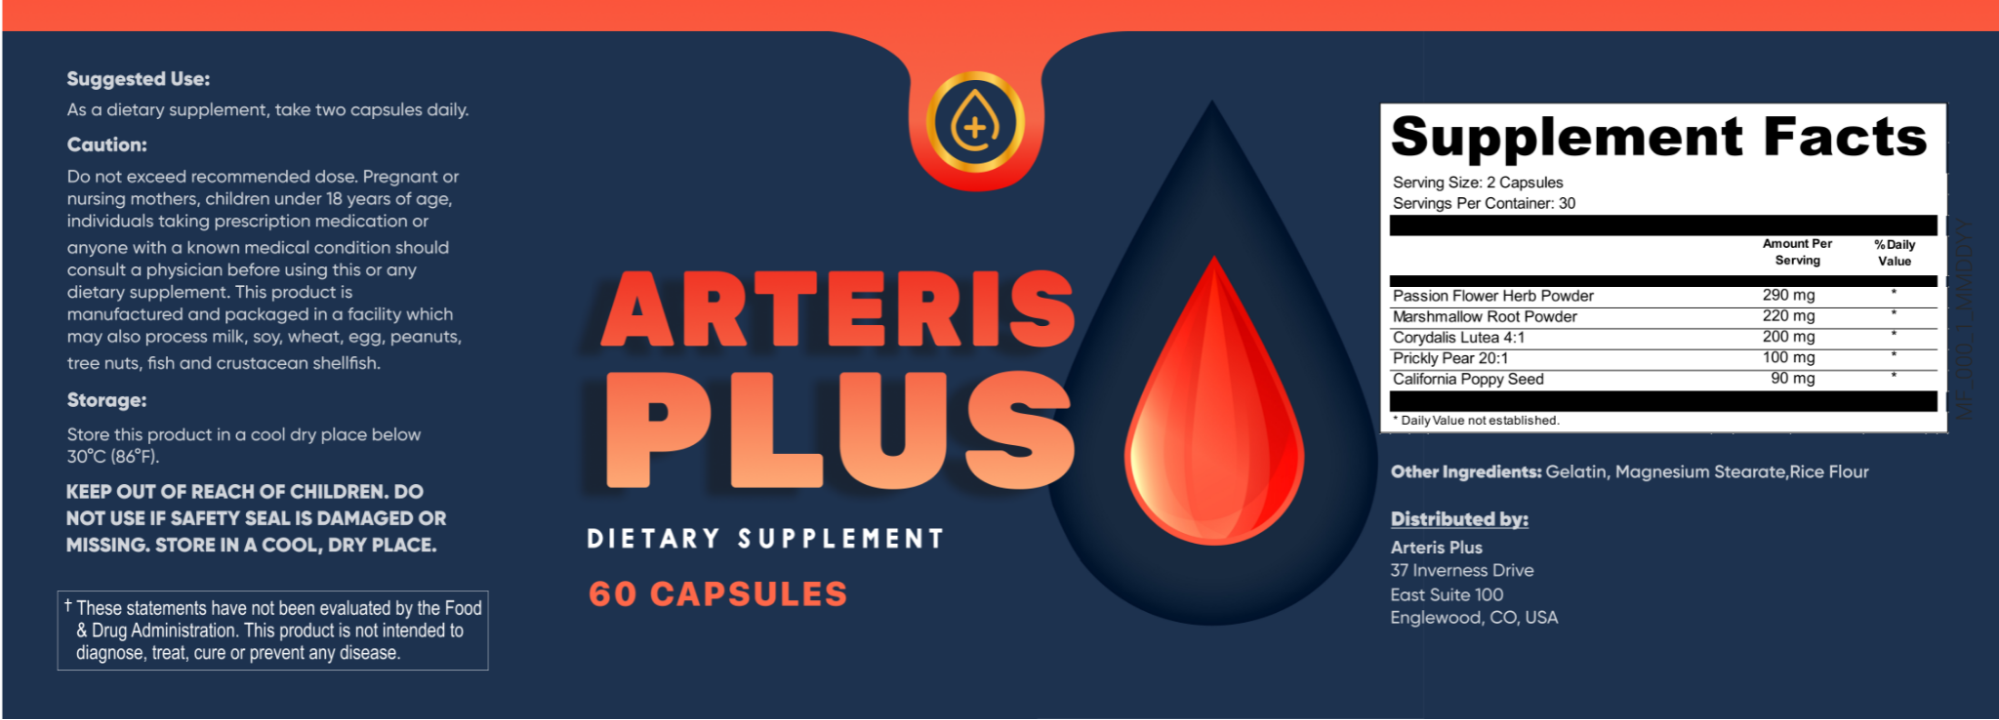 Arteris Plus – The power of natural ingredients for healthy arteries